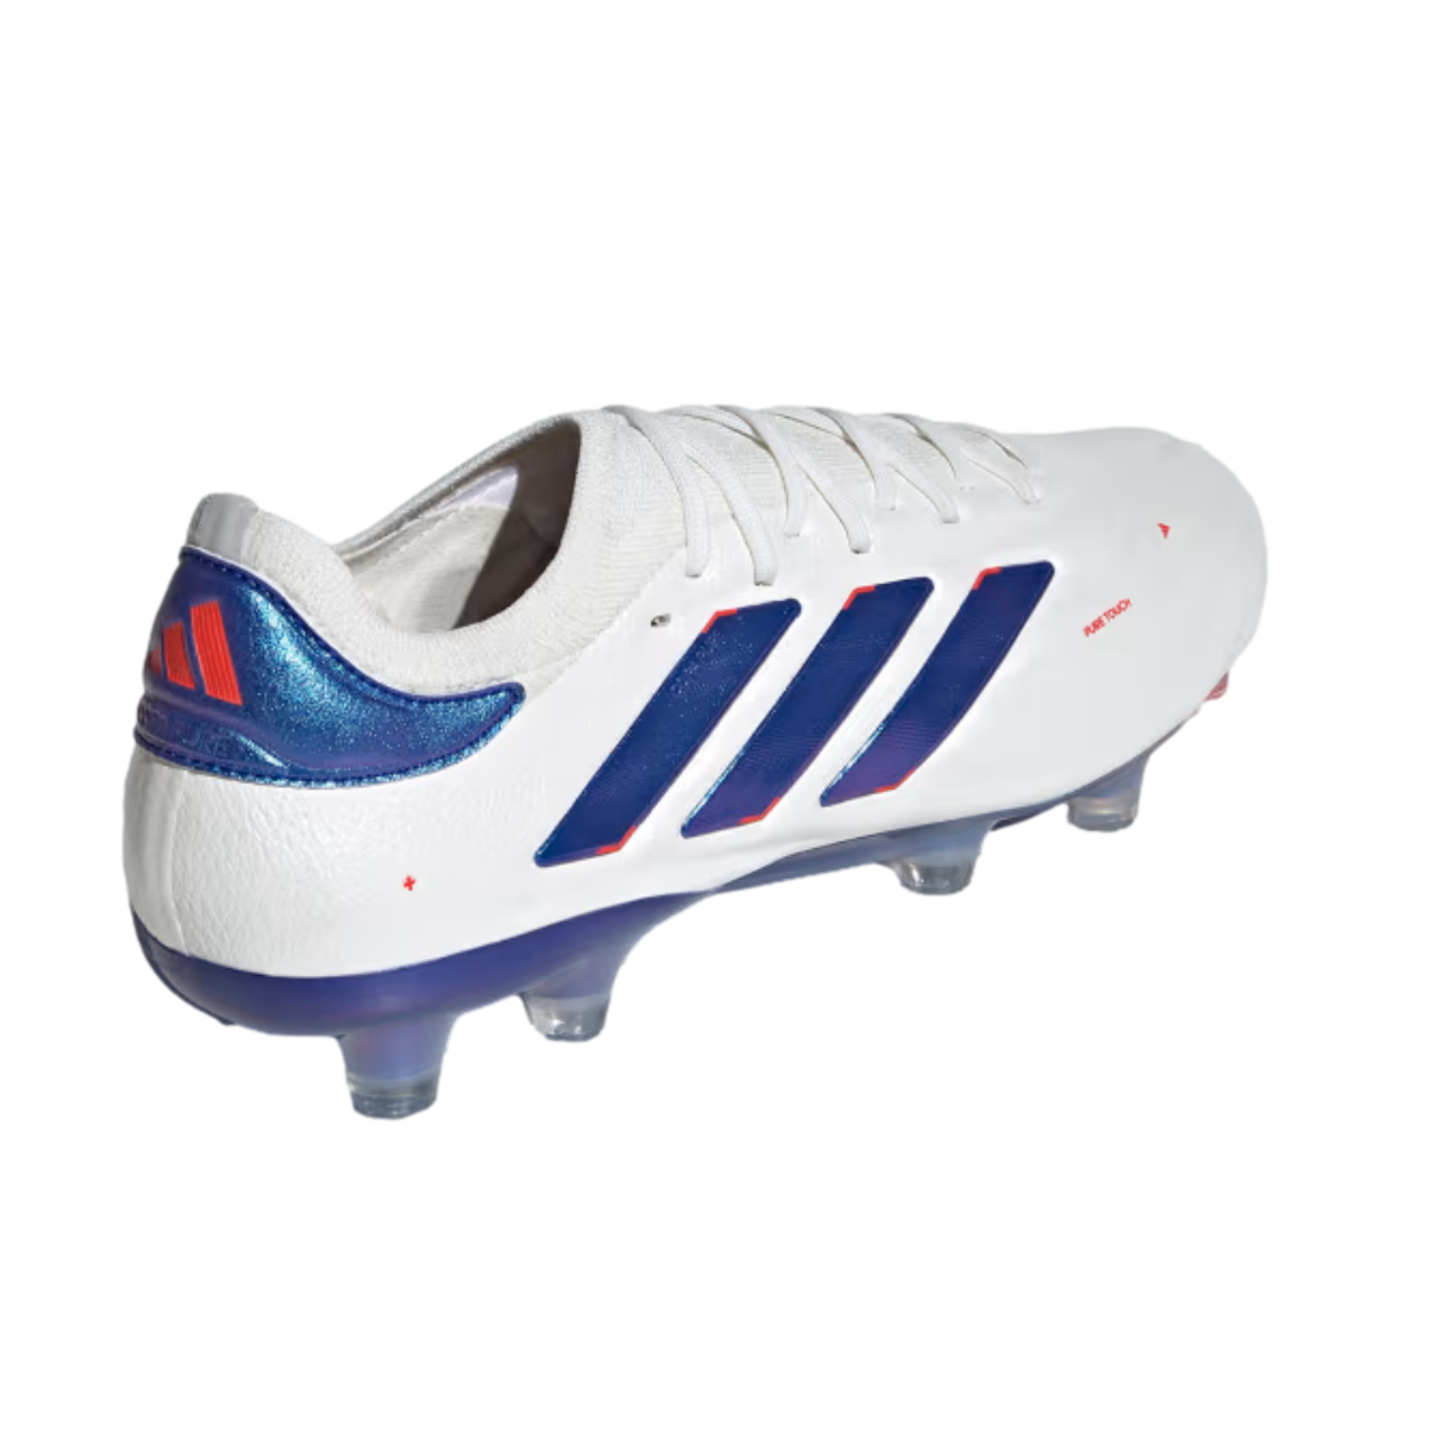 Adidas Copa Pure 2 Elite KT Firm Ground Cleats